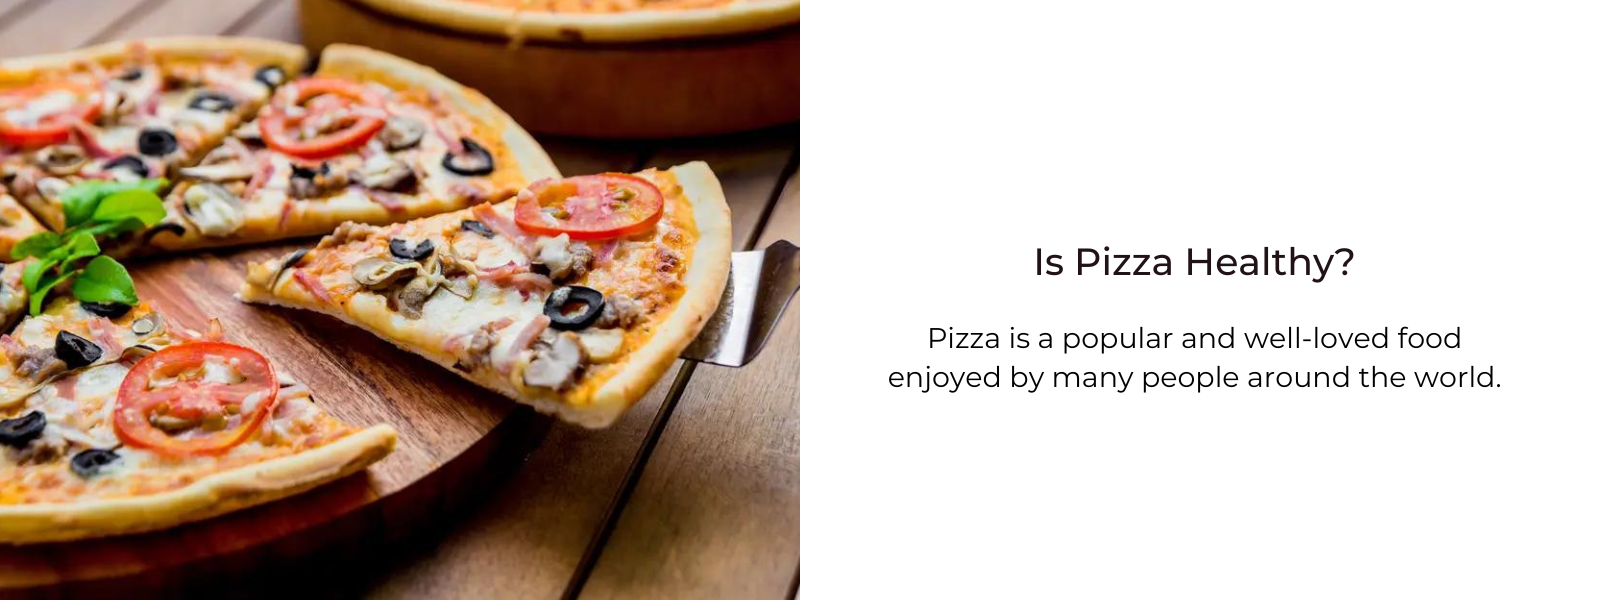 Is Pizza Healthy?